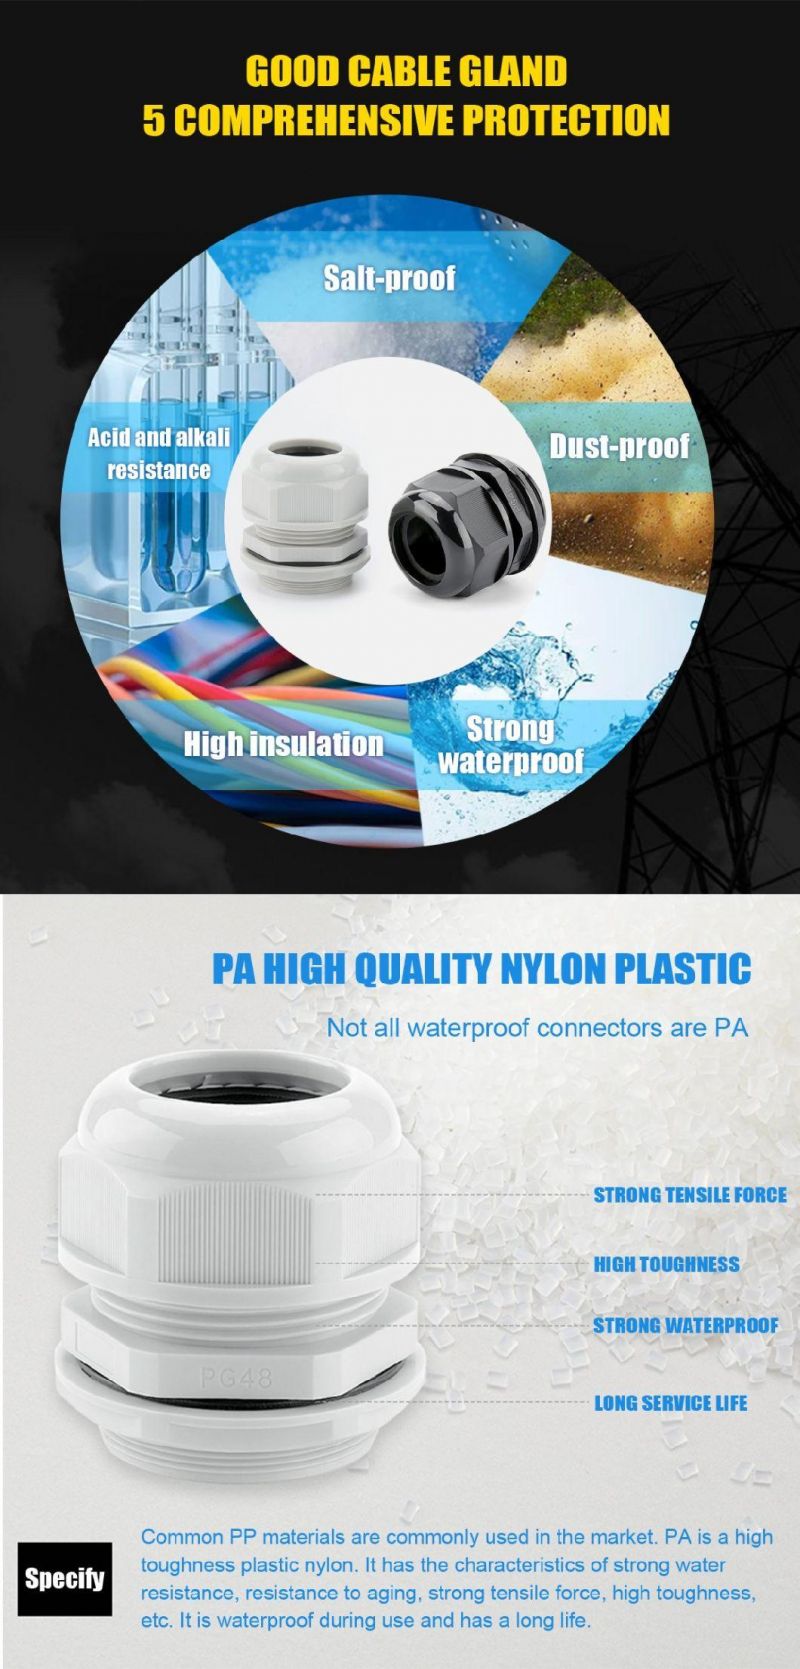 11 Pg/M Plastic Nylon Explosion Proof IP68 Cable Glands